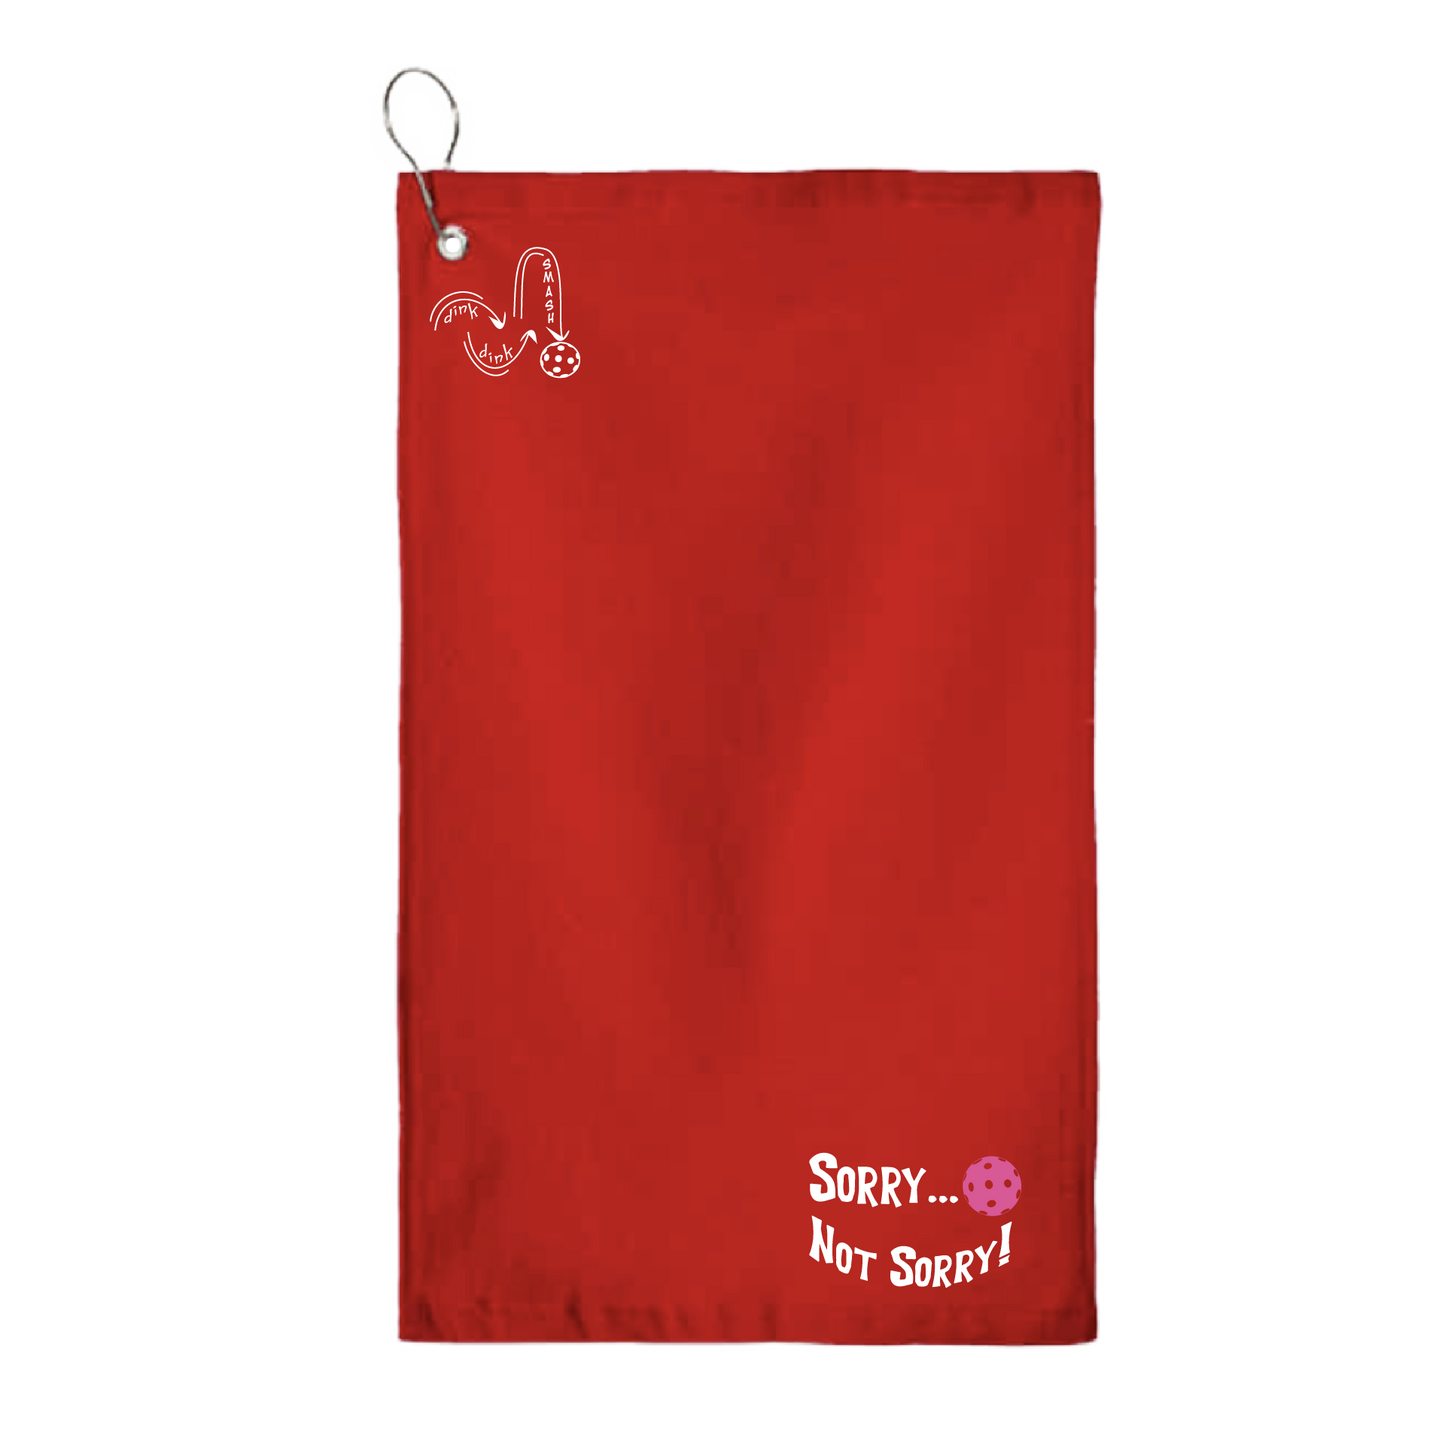 This Sorry...Not Sorry pickleball towel is crafted with cotton terry velour for optimal performance. It features grommets, hooks, and hemmed edges for added durability. It's perfect for completing your pickleball gear, and an ideal gift for friends and tournaments. The towel is designed to be both absorbent and lightweight, so you can remain dry and comfortable while you play.